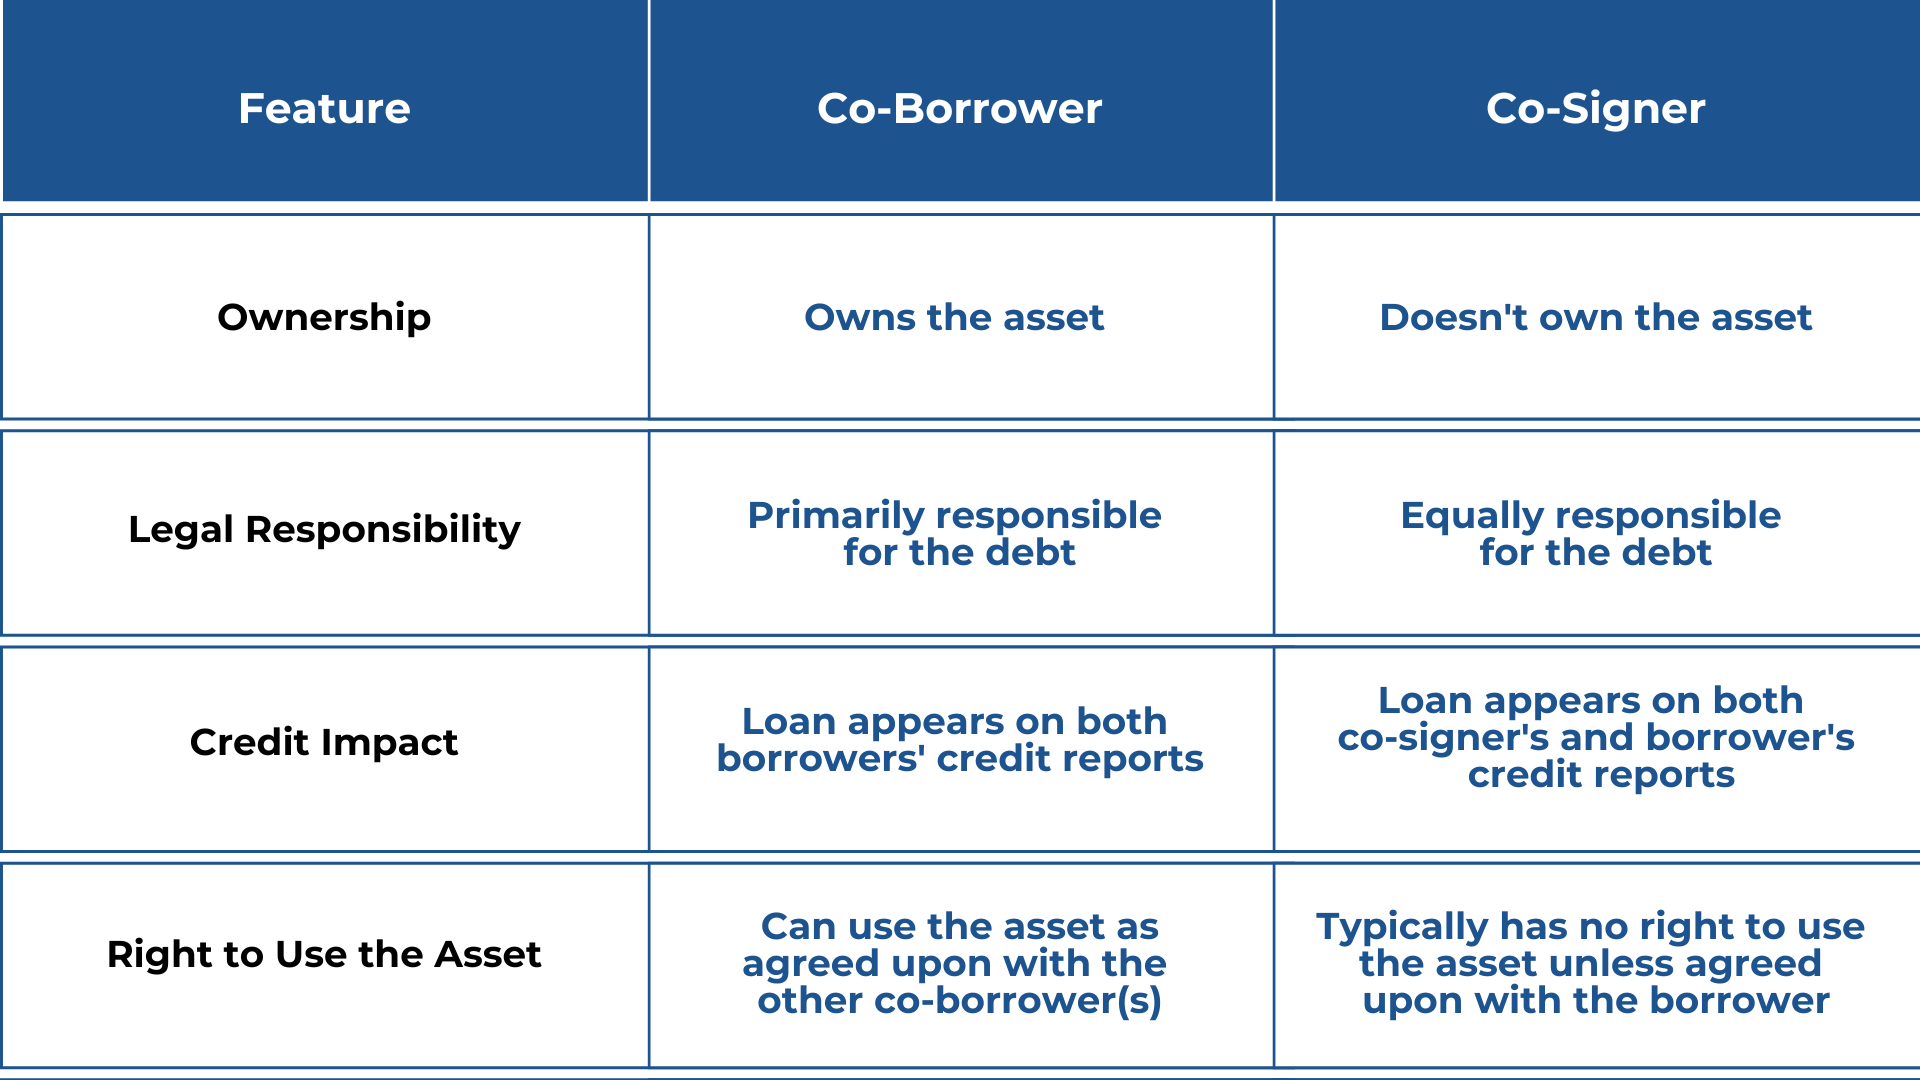 Infographic explaining the differences of Ownership, legal responsibility, credit impact, and right to use the asset between the a co-borrower and a co-signer. 